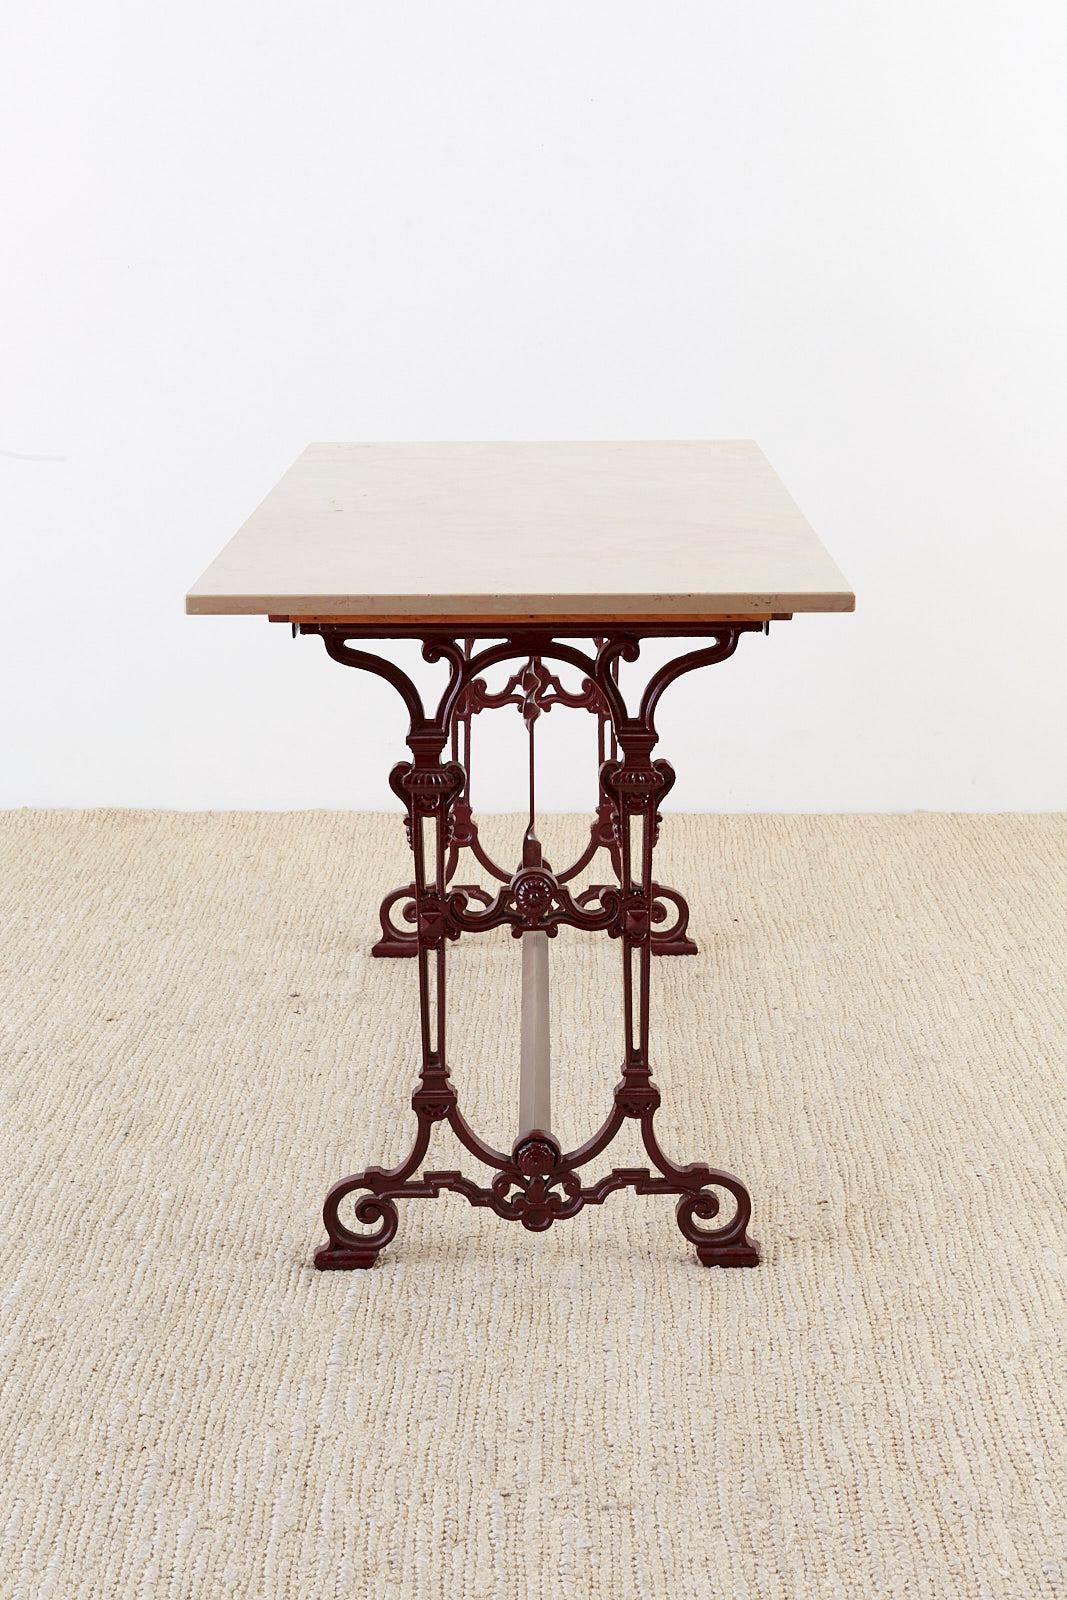 Polished French Art Nouveau Iron and Marble Bistro Table